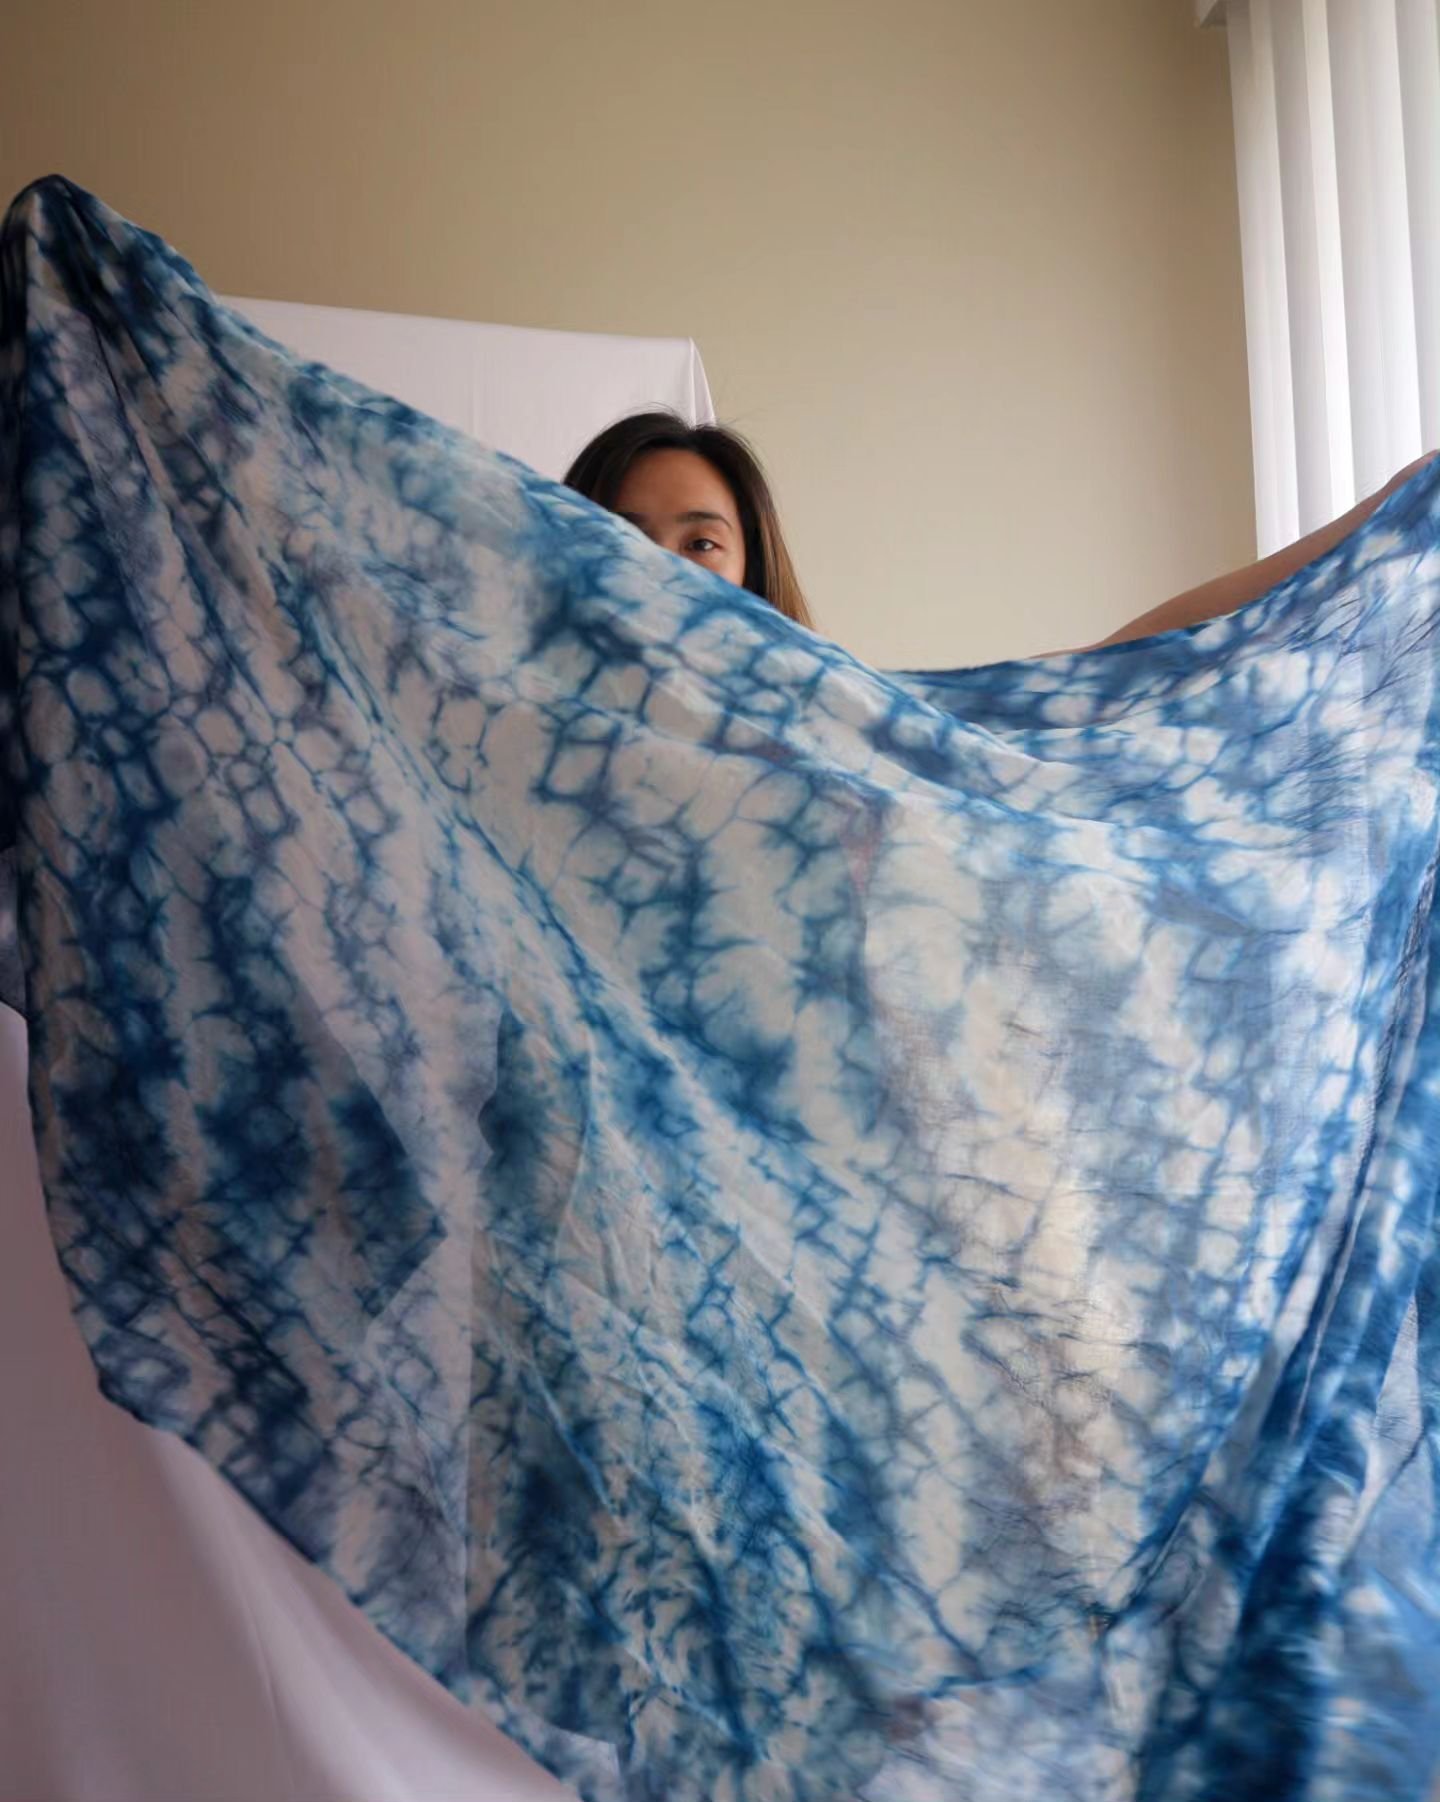 Hey! Looking for a last minute Mother's Day gift? Two spots left for the Indigo Dyeing Experience on May 18th. Learn about surface design techniques and create your own wearable art. DM mothersday and I'll and you the link.

Calendar update:
(Full) T